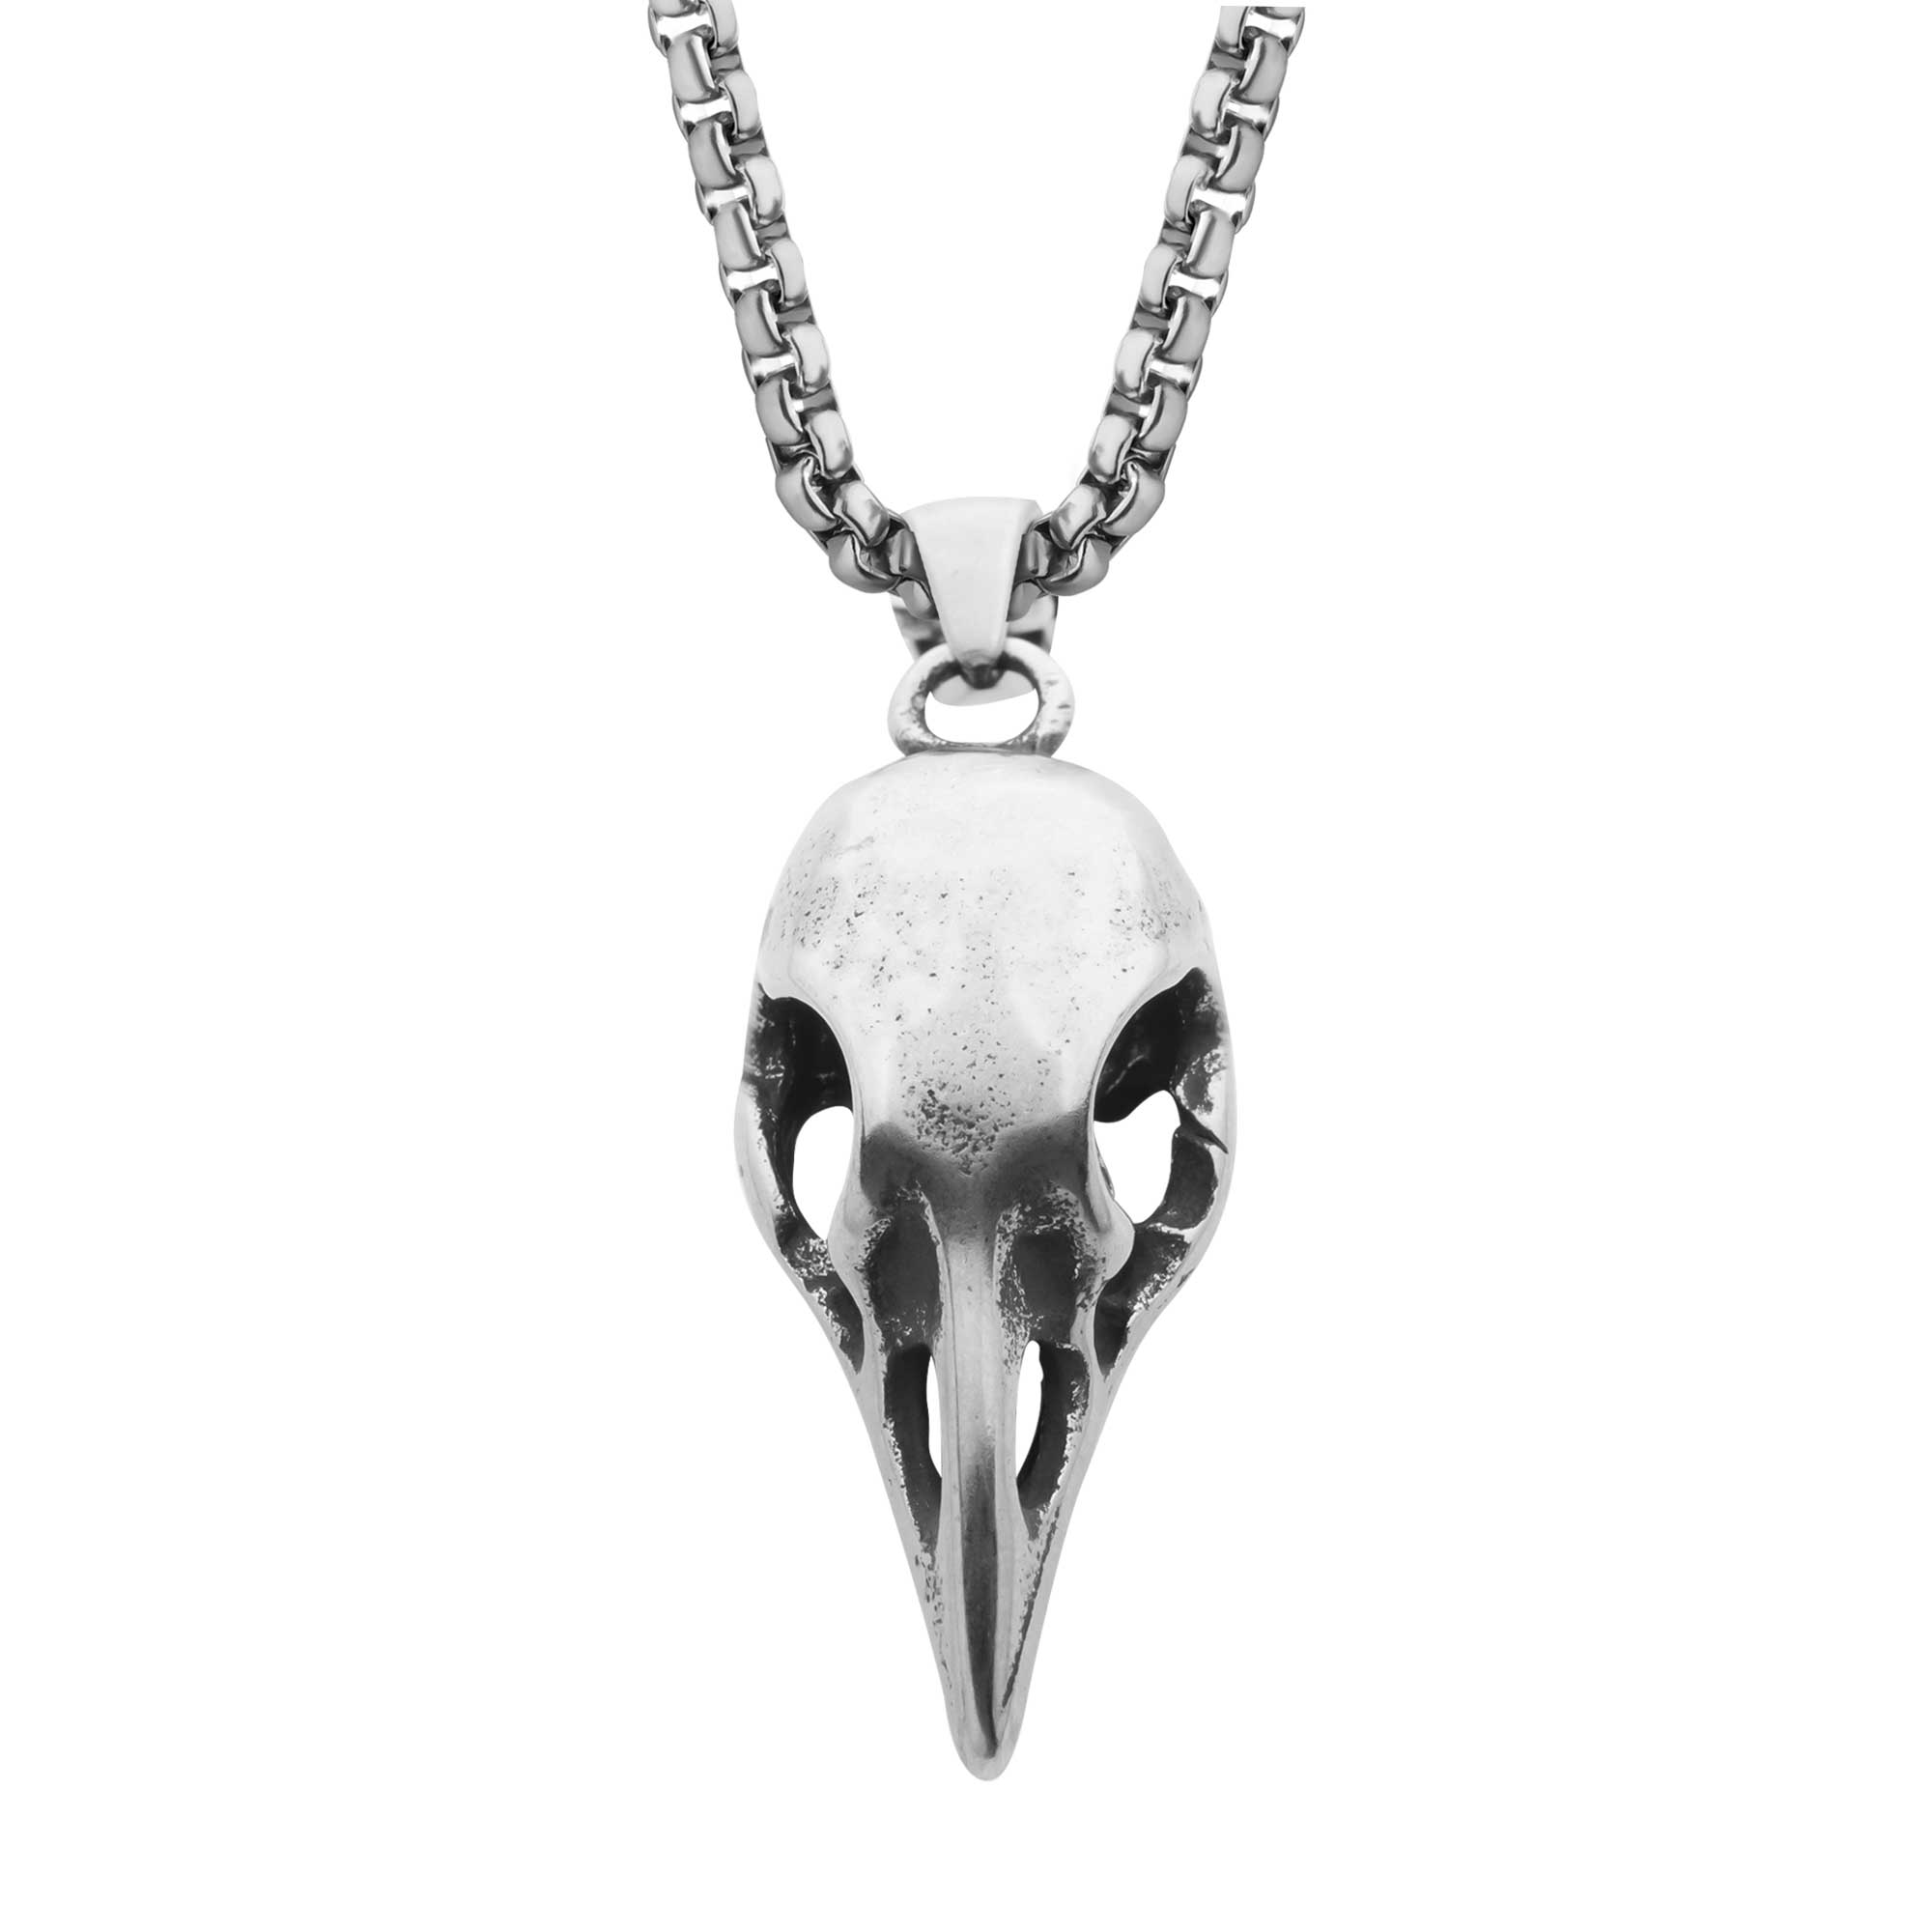 Distressed Matte Steel Crow Skull Pendant with Chain Lewis Jewelers, Inc. Ansonia, CT